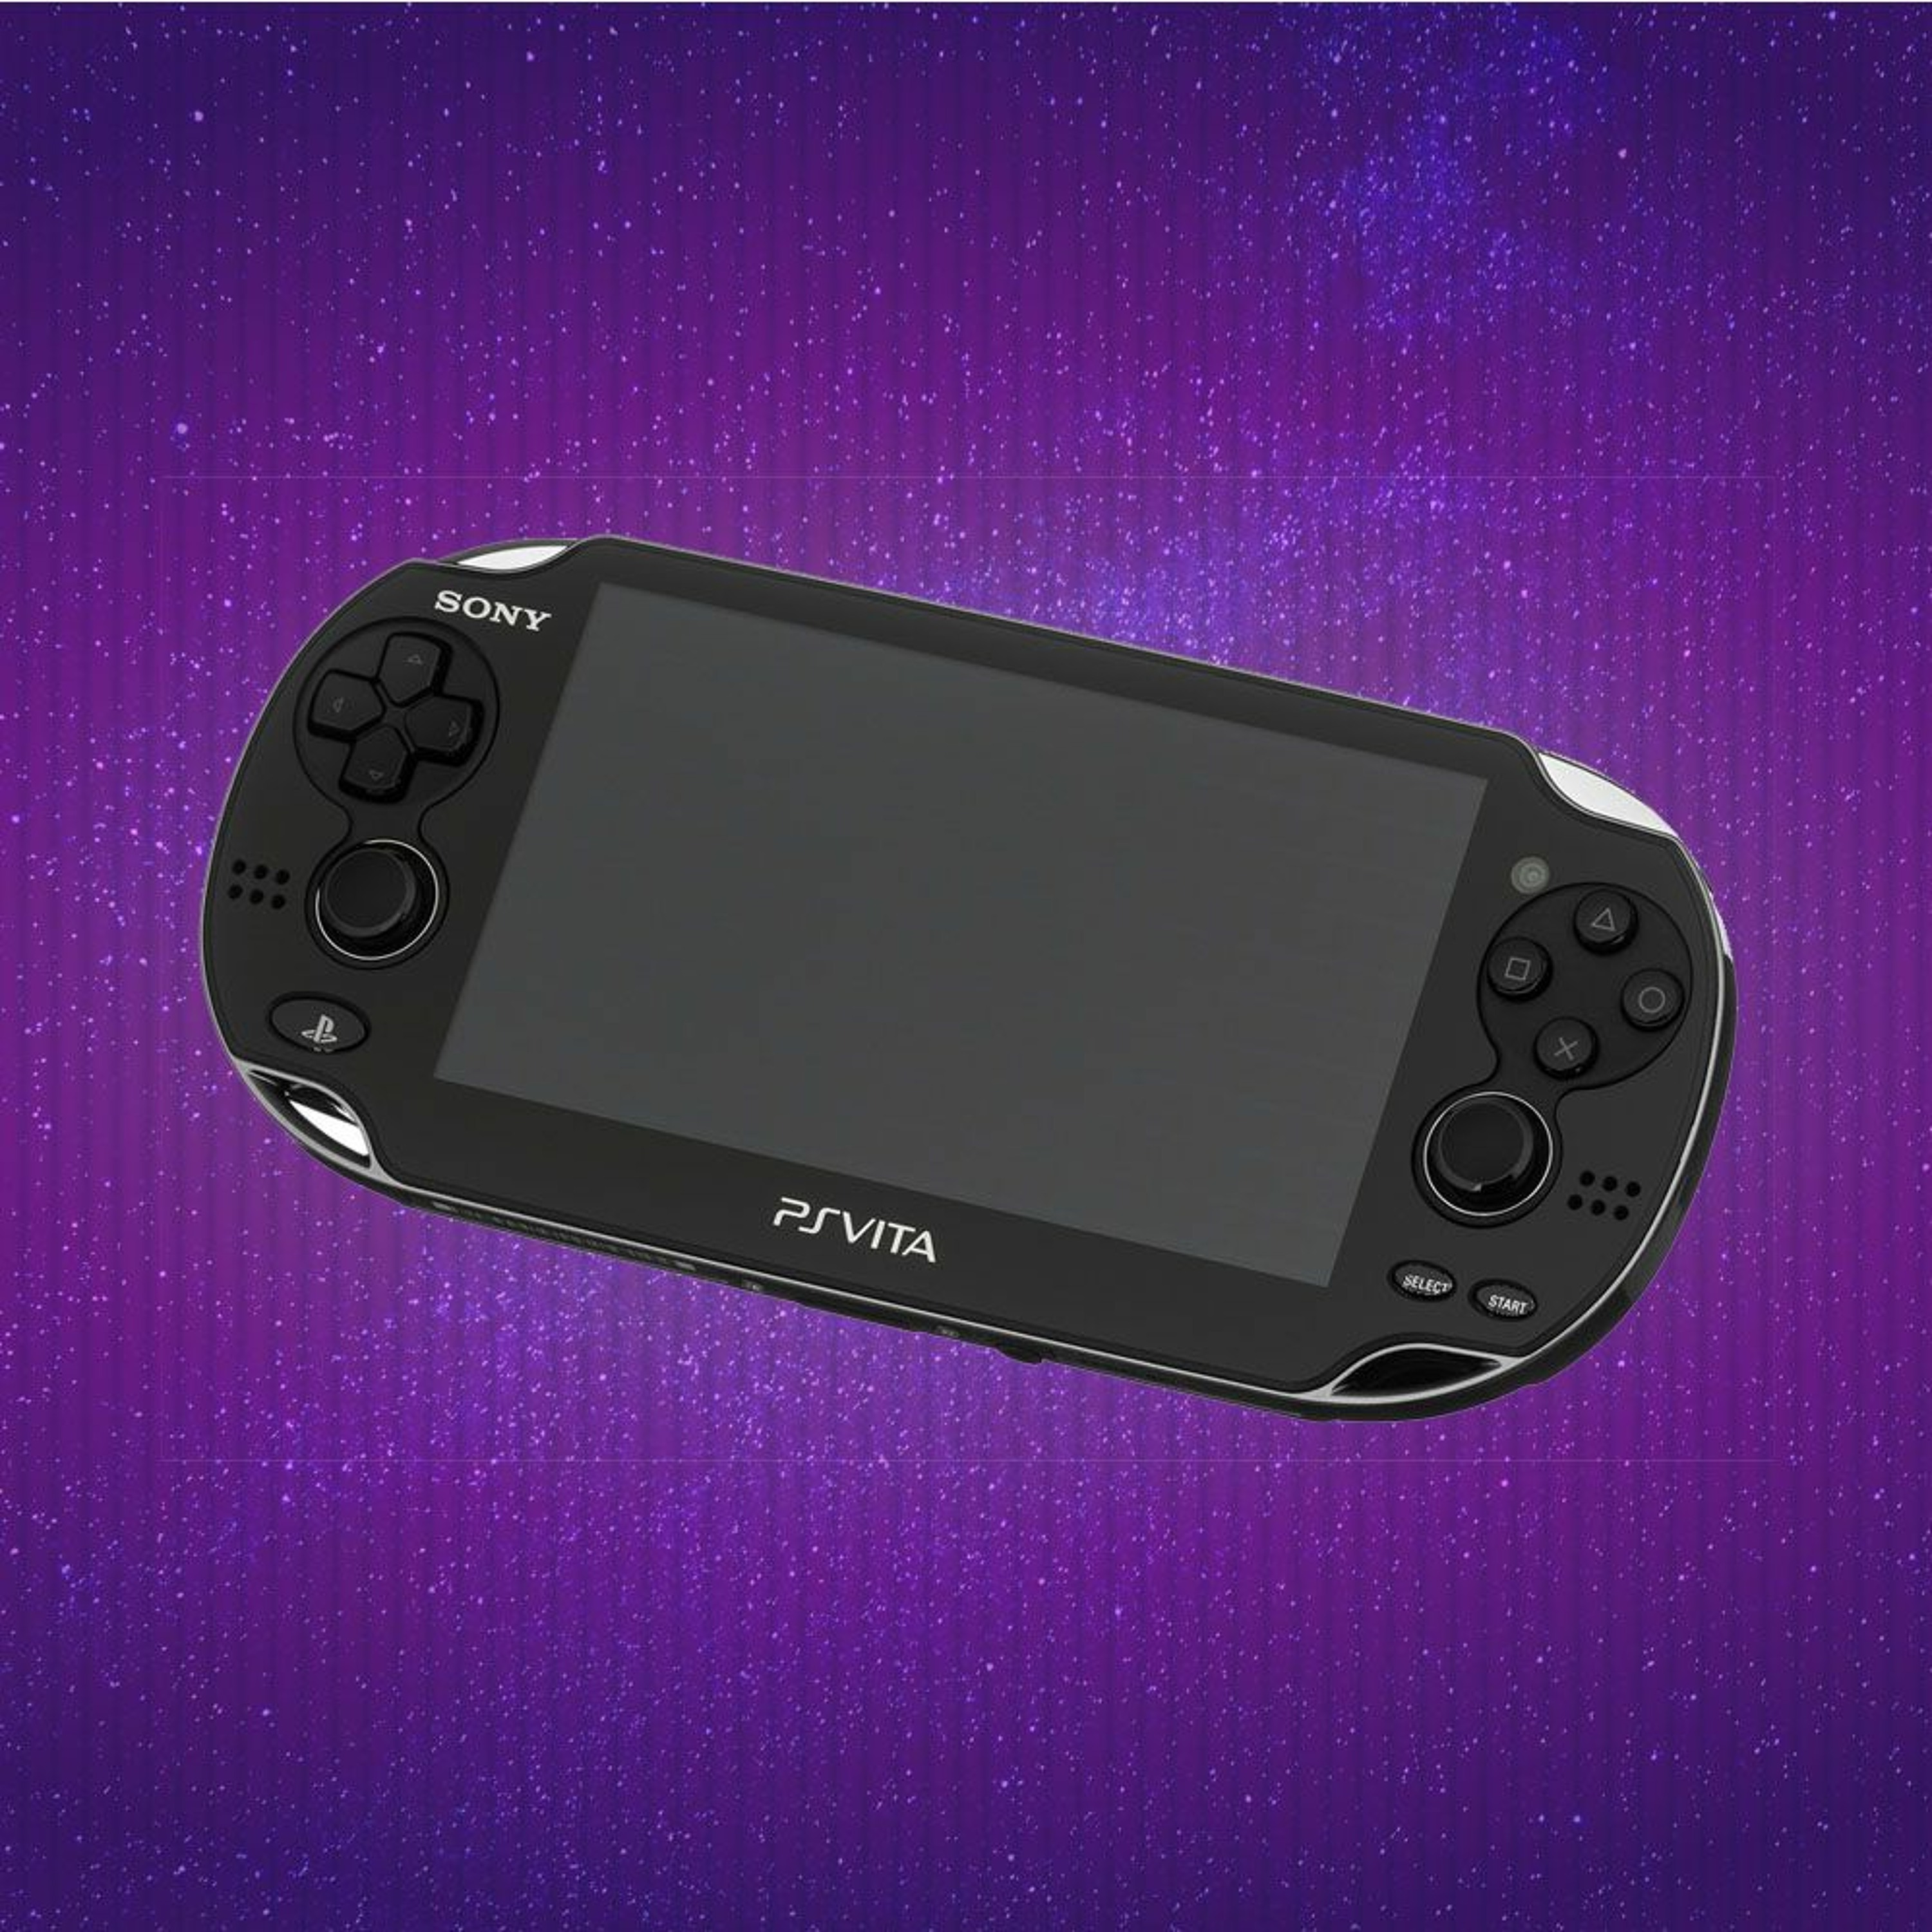 Podquisition 372: The PS Vita Special